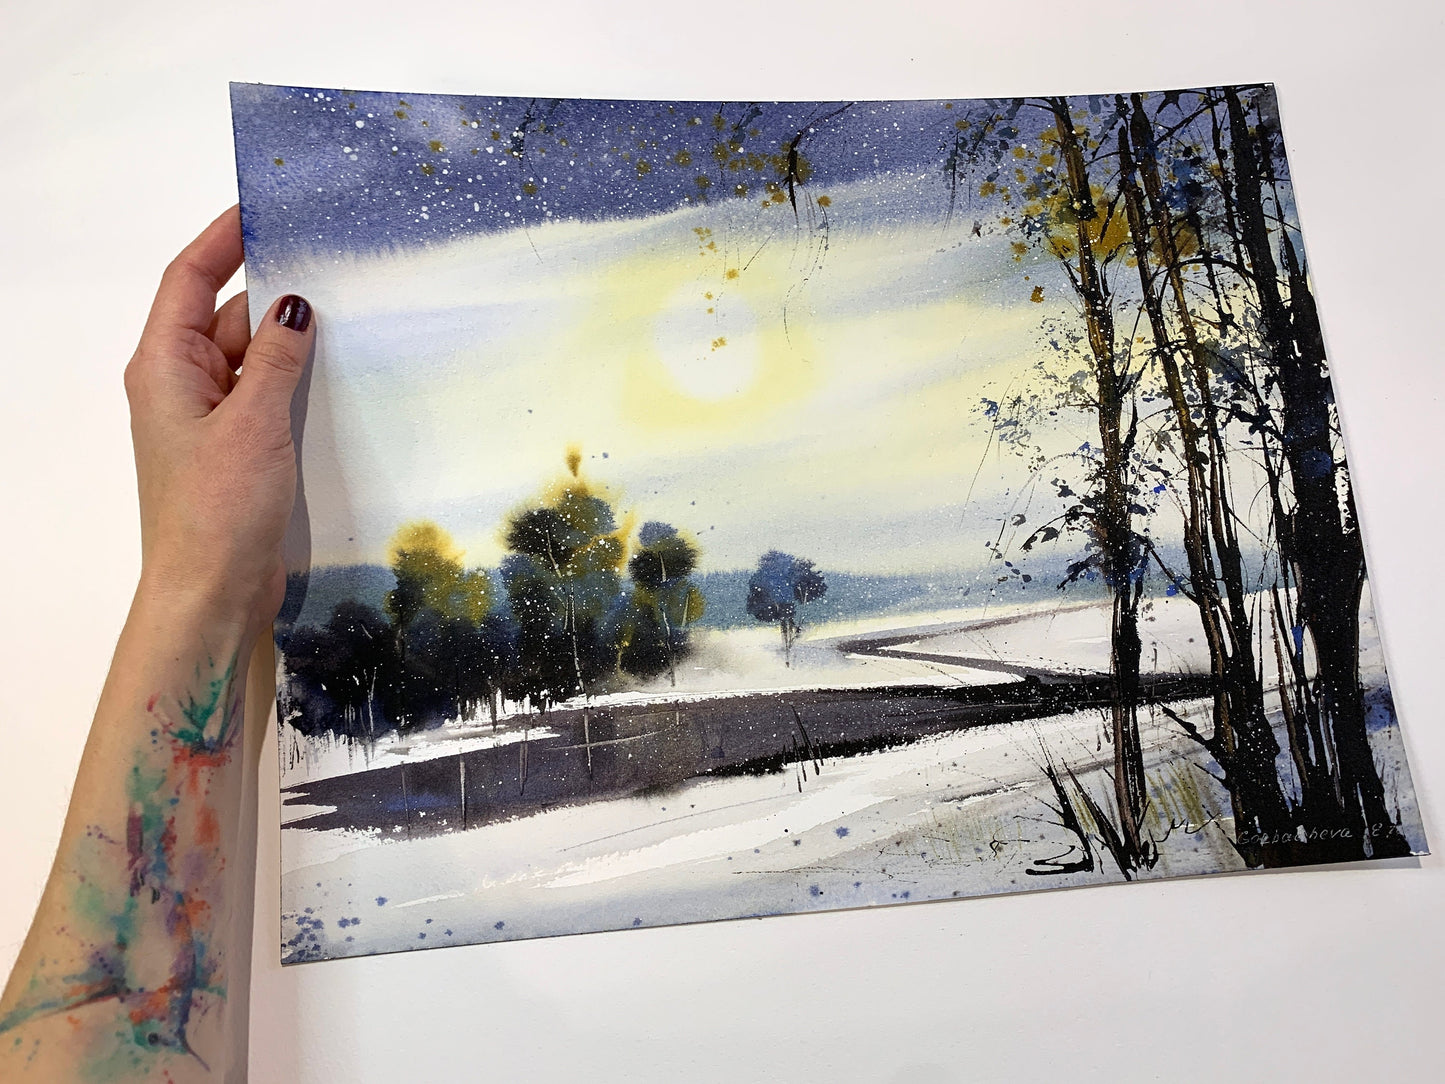 Early Winter Landscape Painting Original Watercolor, Snowy Field Trees Forest, Sun Blue Sky, First Home Gift, Nature Wall Art